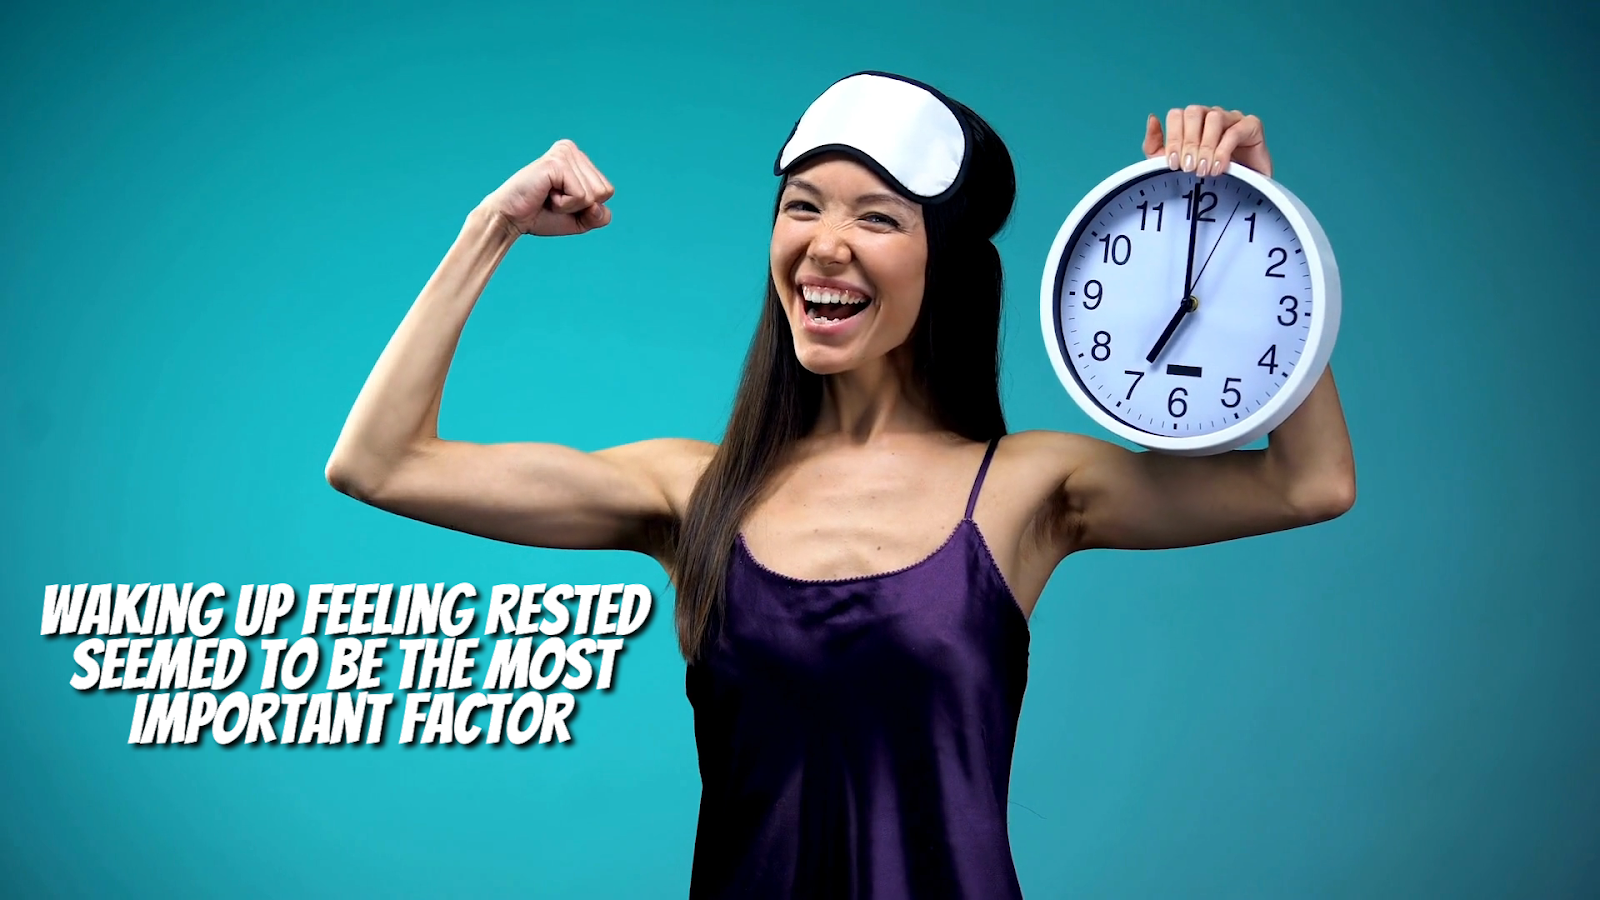 Consistent sleeping patterns is an important factor in muscle and strength increases and weight loss